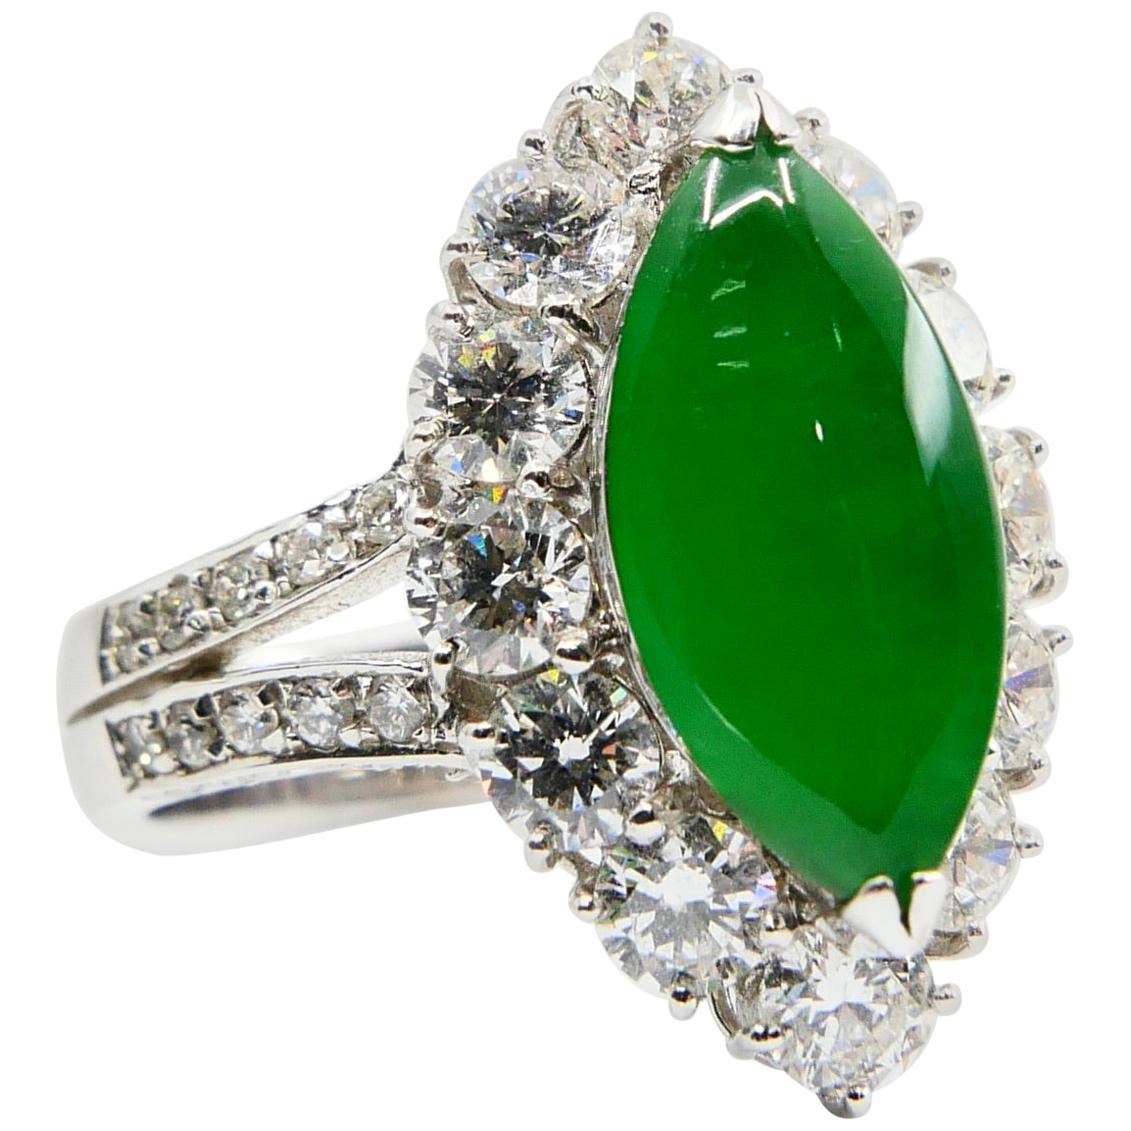 Certified Type A Jadeite Jade Diamond And Cocktail Ring, Imperial Green Color For Sale